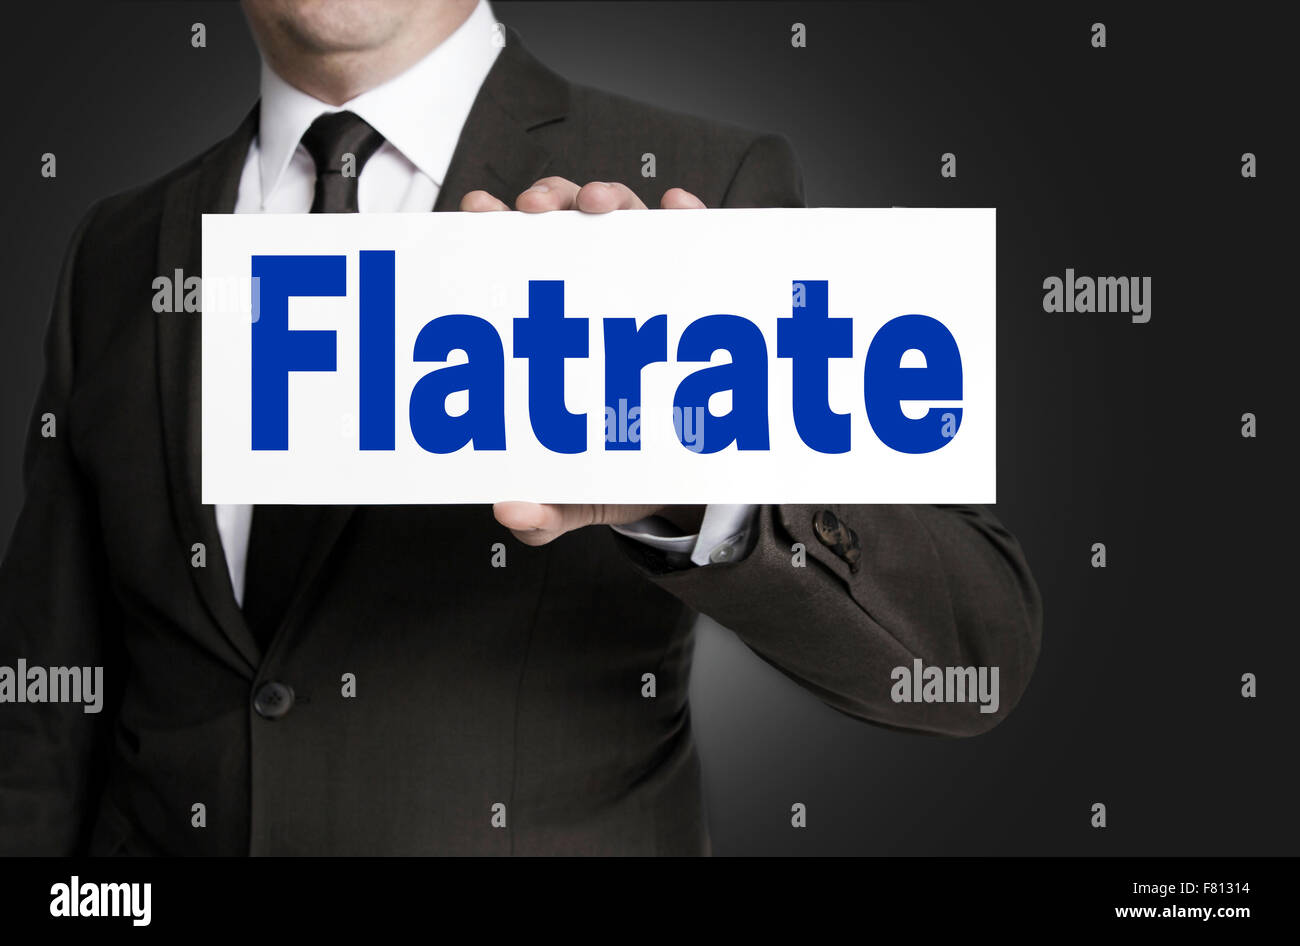 Flatrate sign is held by businessman concept. Stock Photo